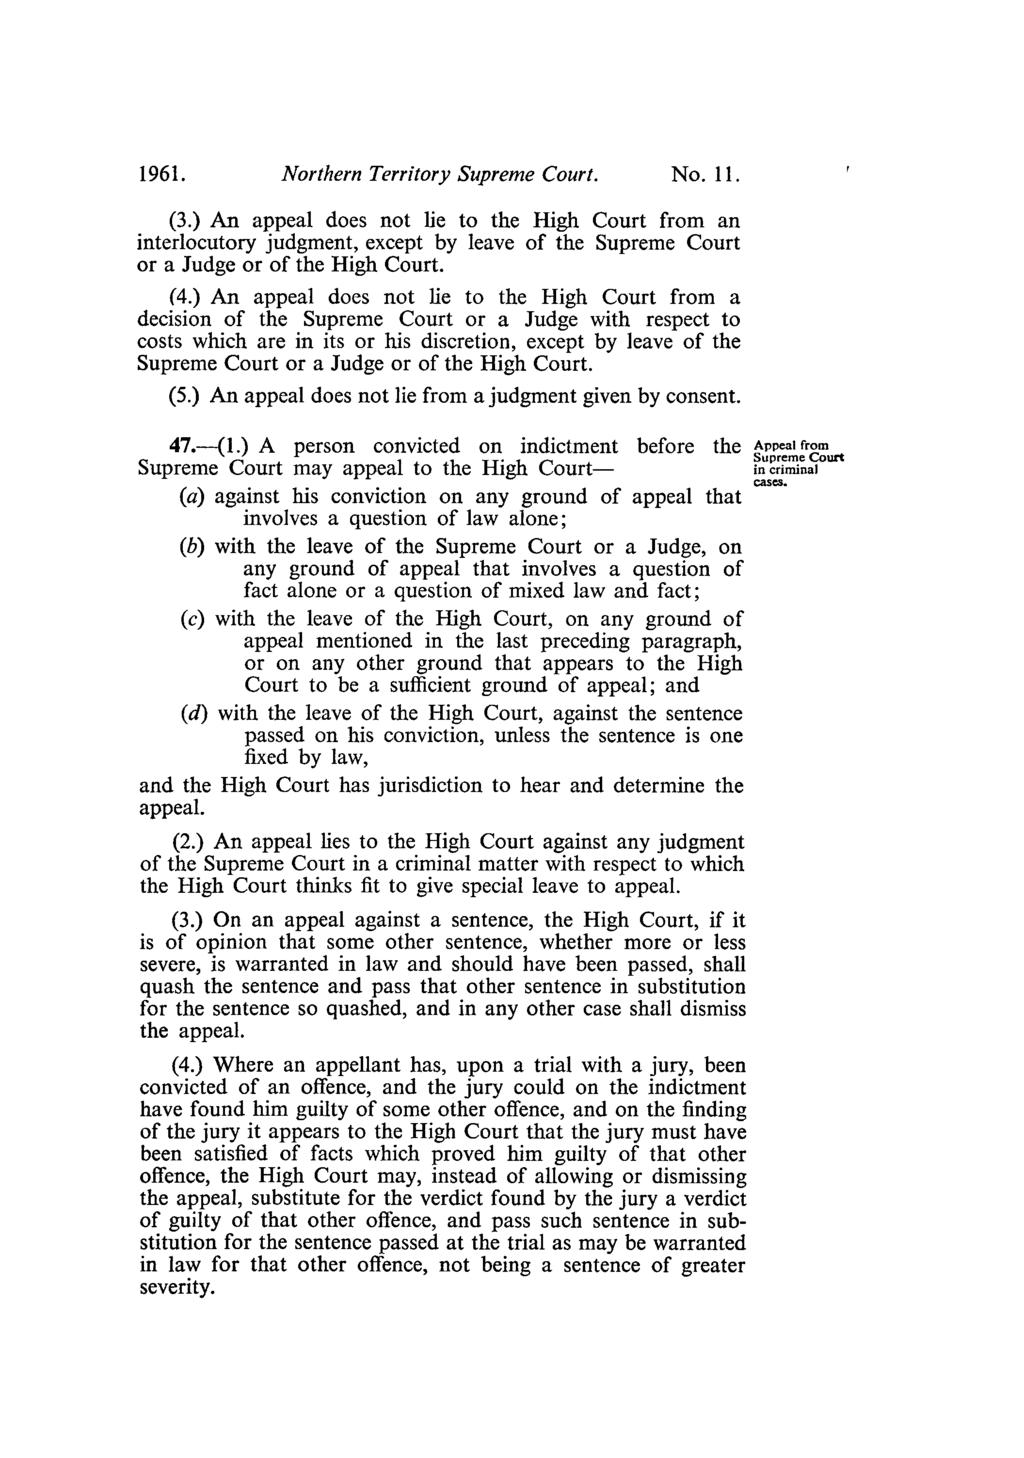 1961. Northern Territory Supreme Court. No. 11. (3.) An appeal does not lie to the High Court from an interlocutory judgment, except by leave of the Supreme Court or a Judge or of the High Court. (4.